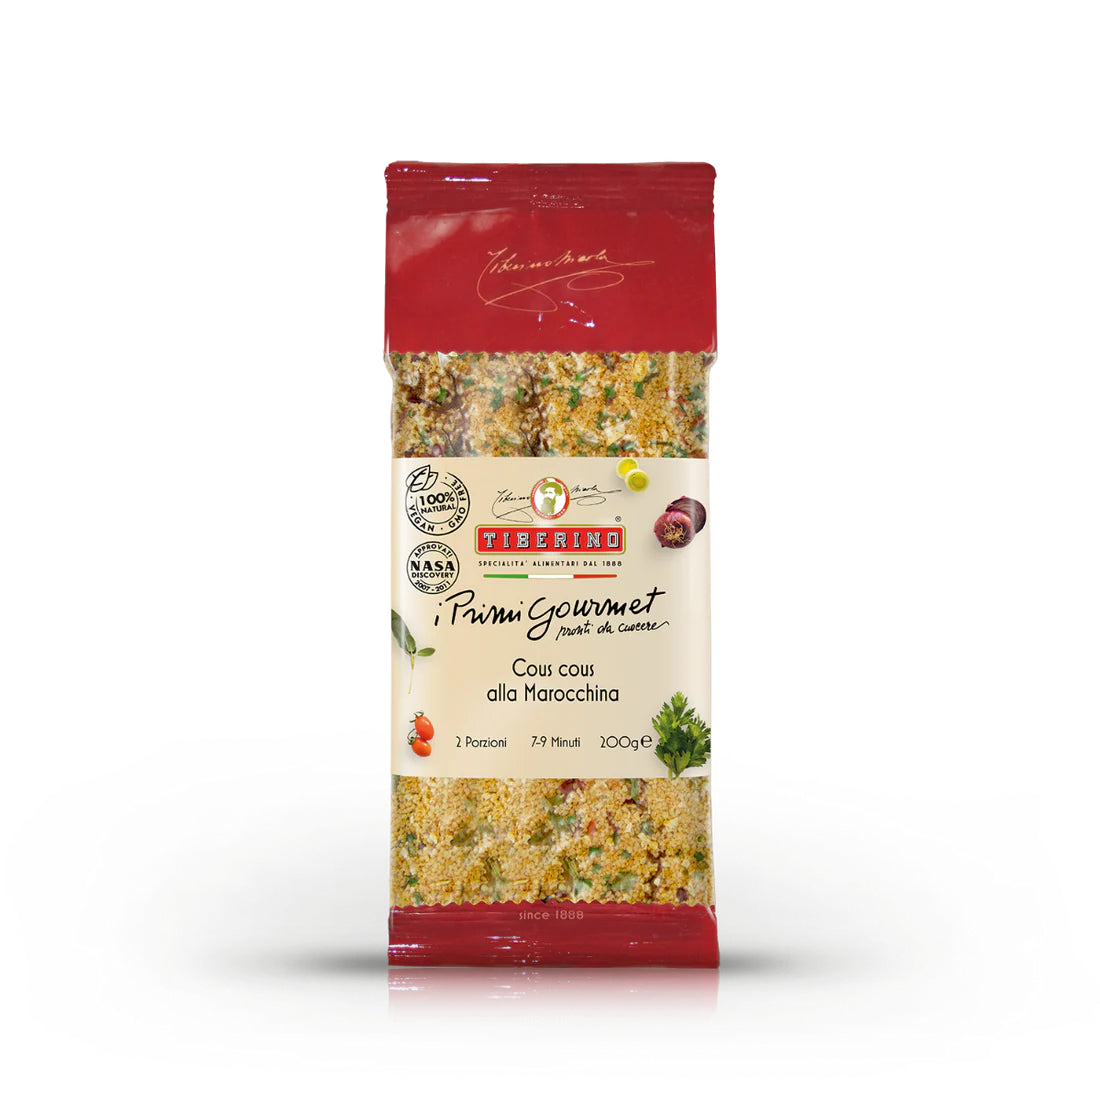 SAMPLE KIT - 1 risotto, 1 couscous, 1 pasta and 1 soup to try a bit of everything